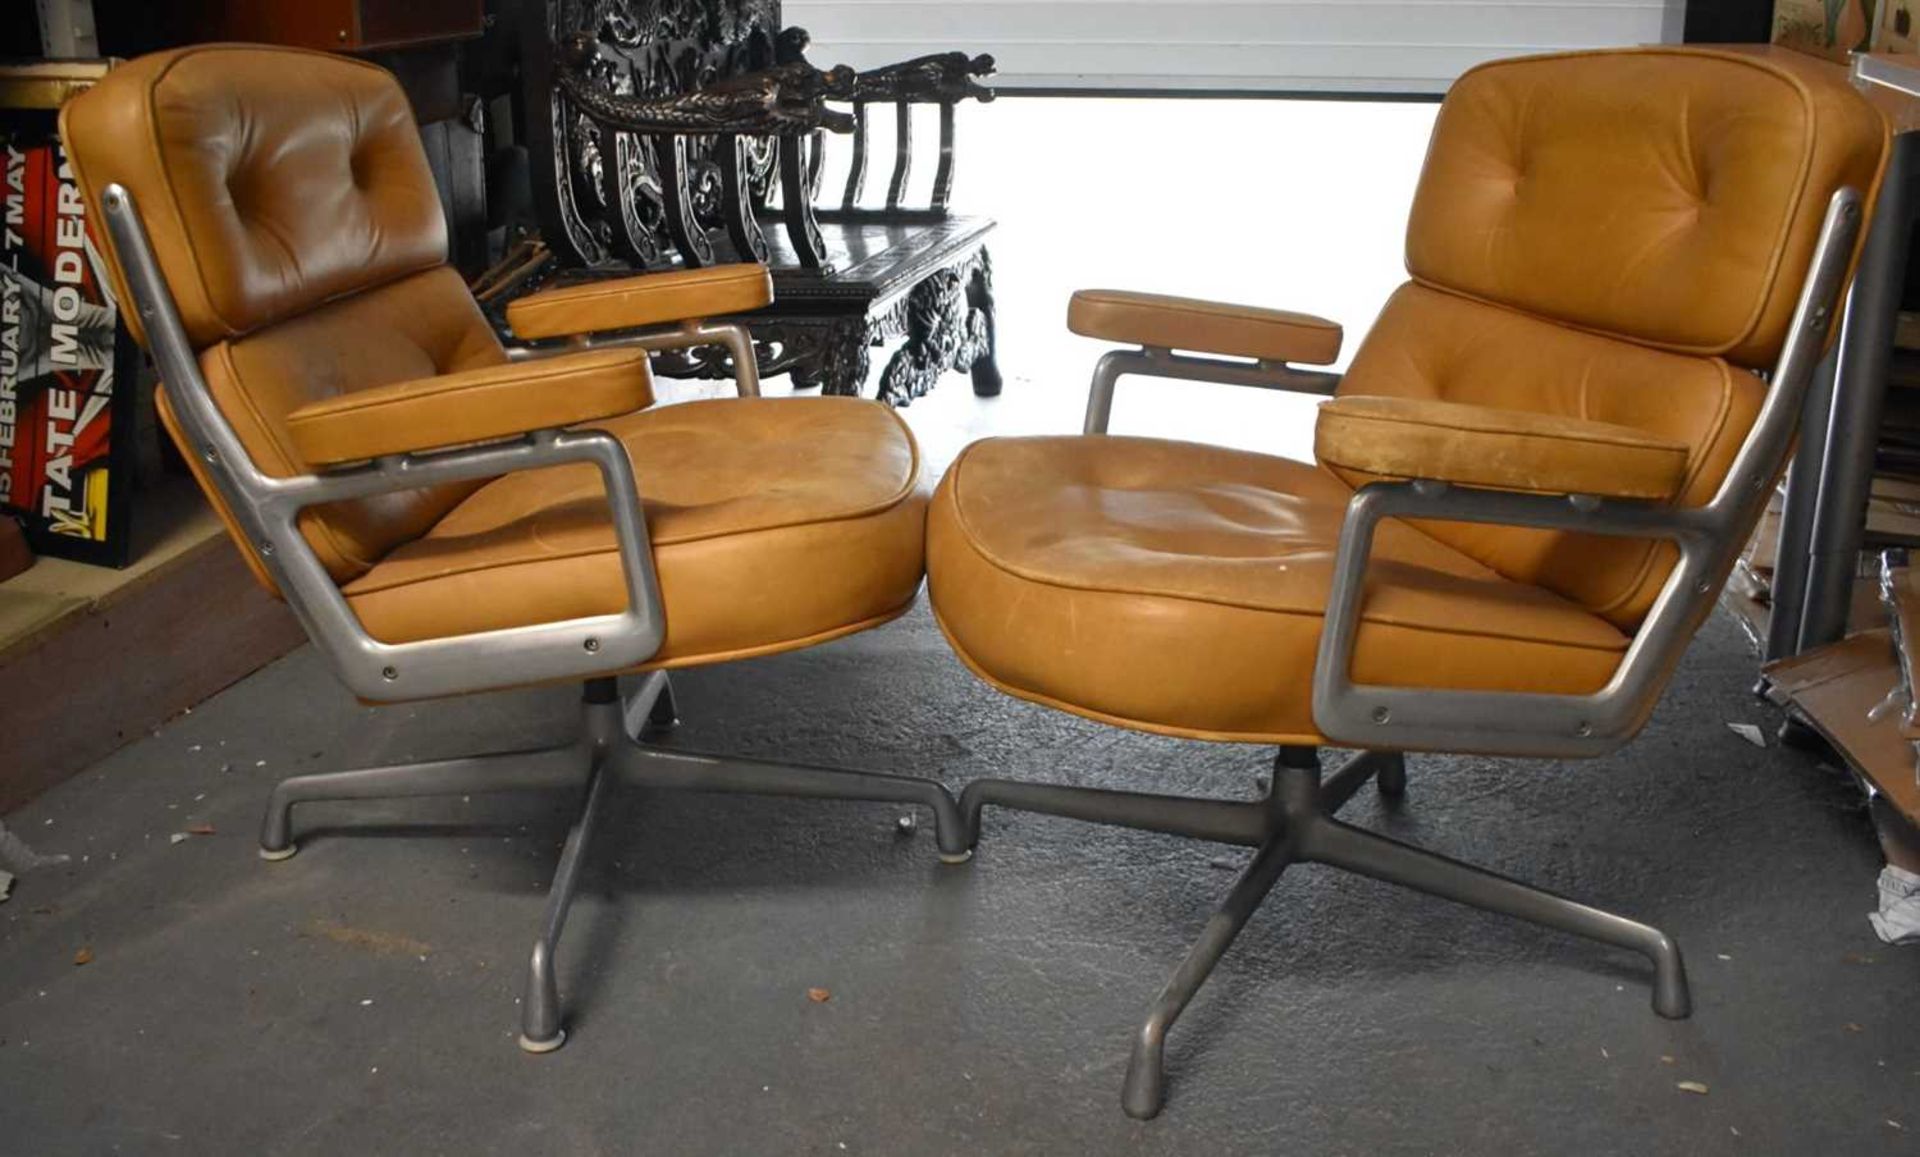 A STYLISH PAIR OF HERMAN MILLER LEATHER SWIVEL CHAIRS. 78 cm x 62 cm. - Image 4 of 7